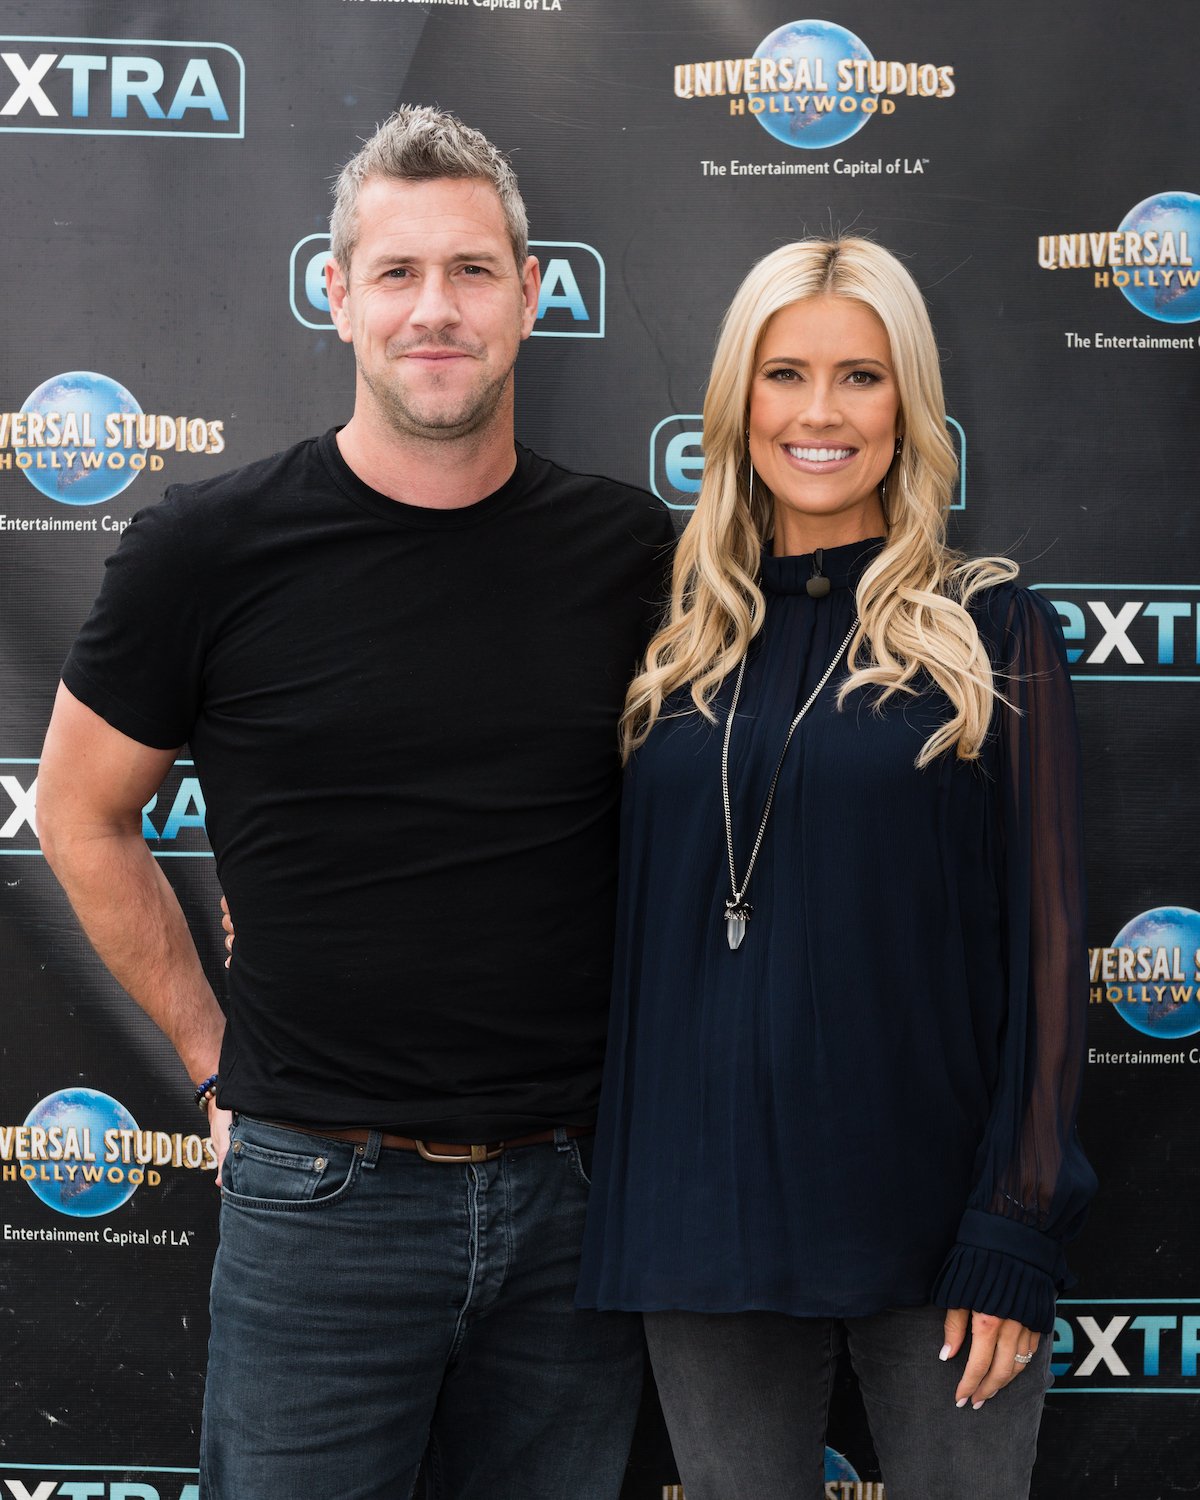 Ant Anstead and Christina Haack when they were married in 2019